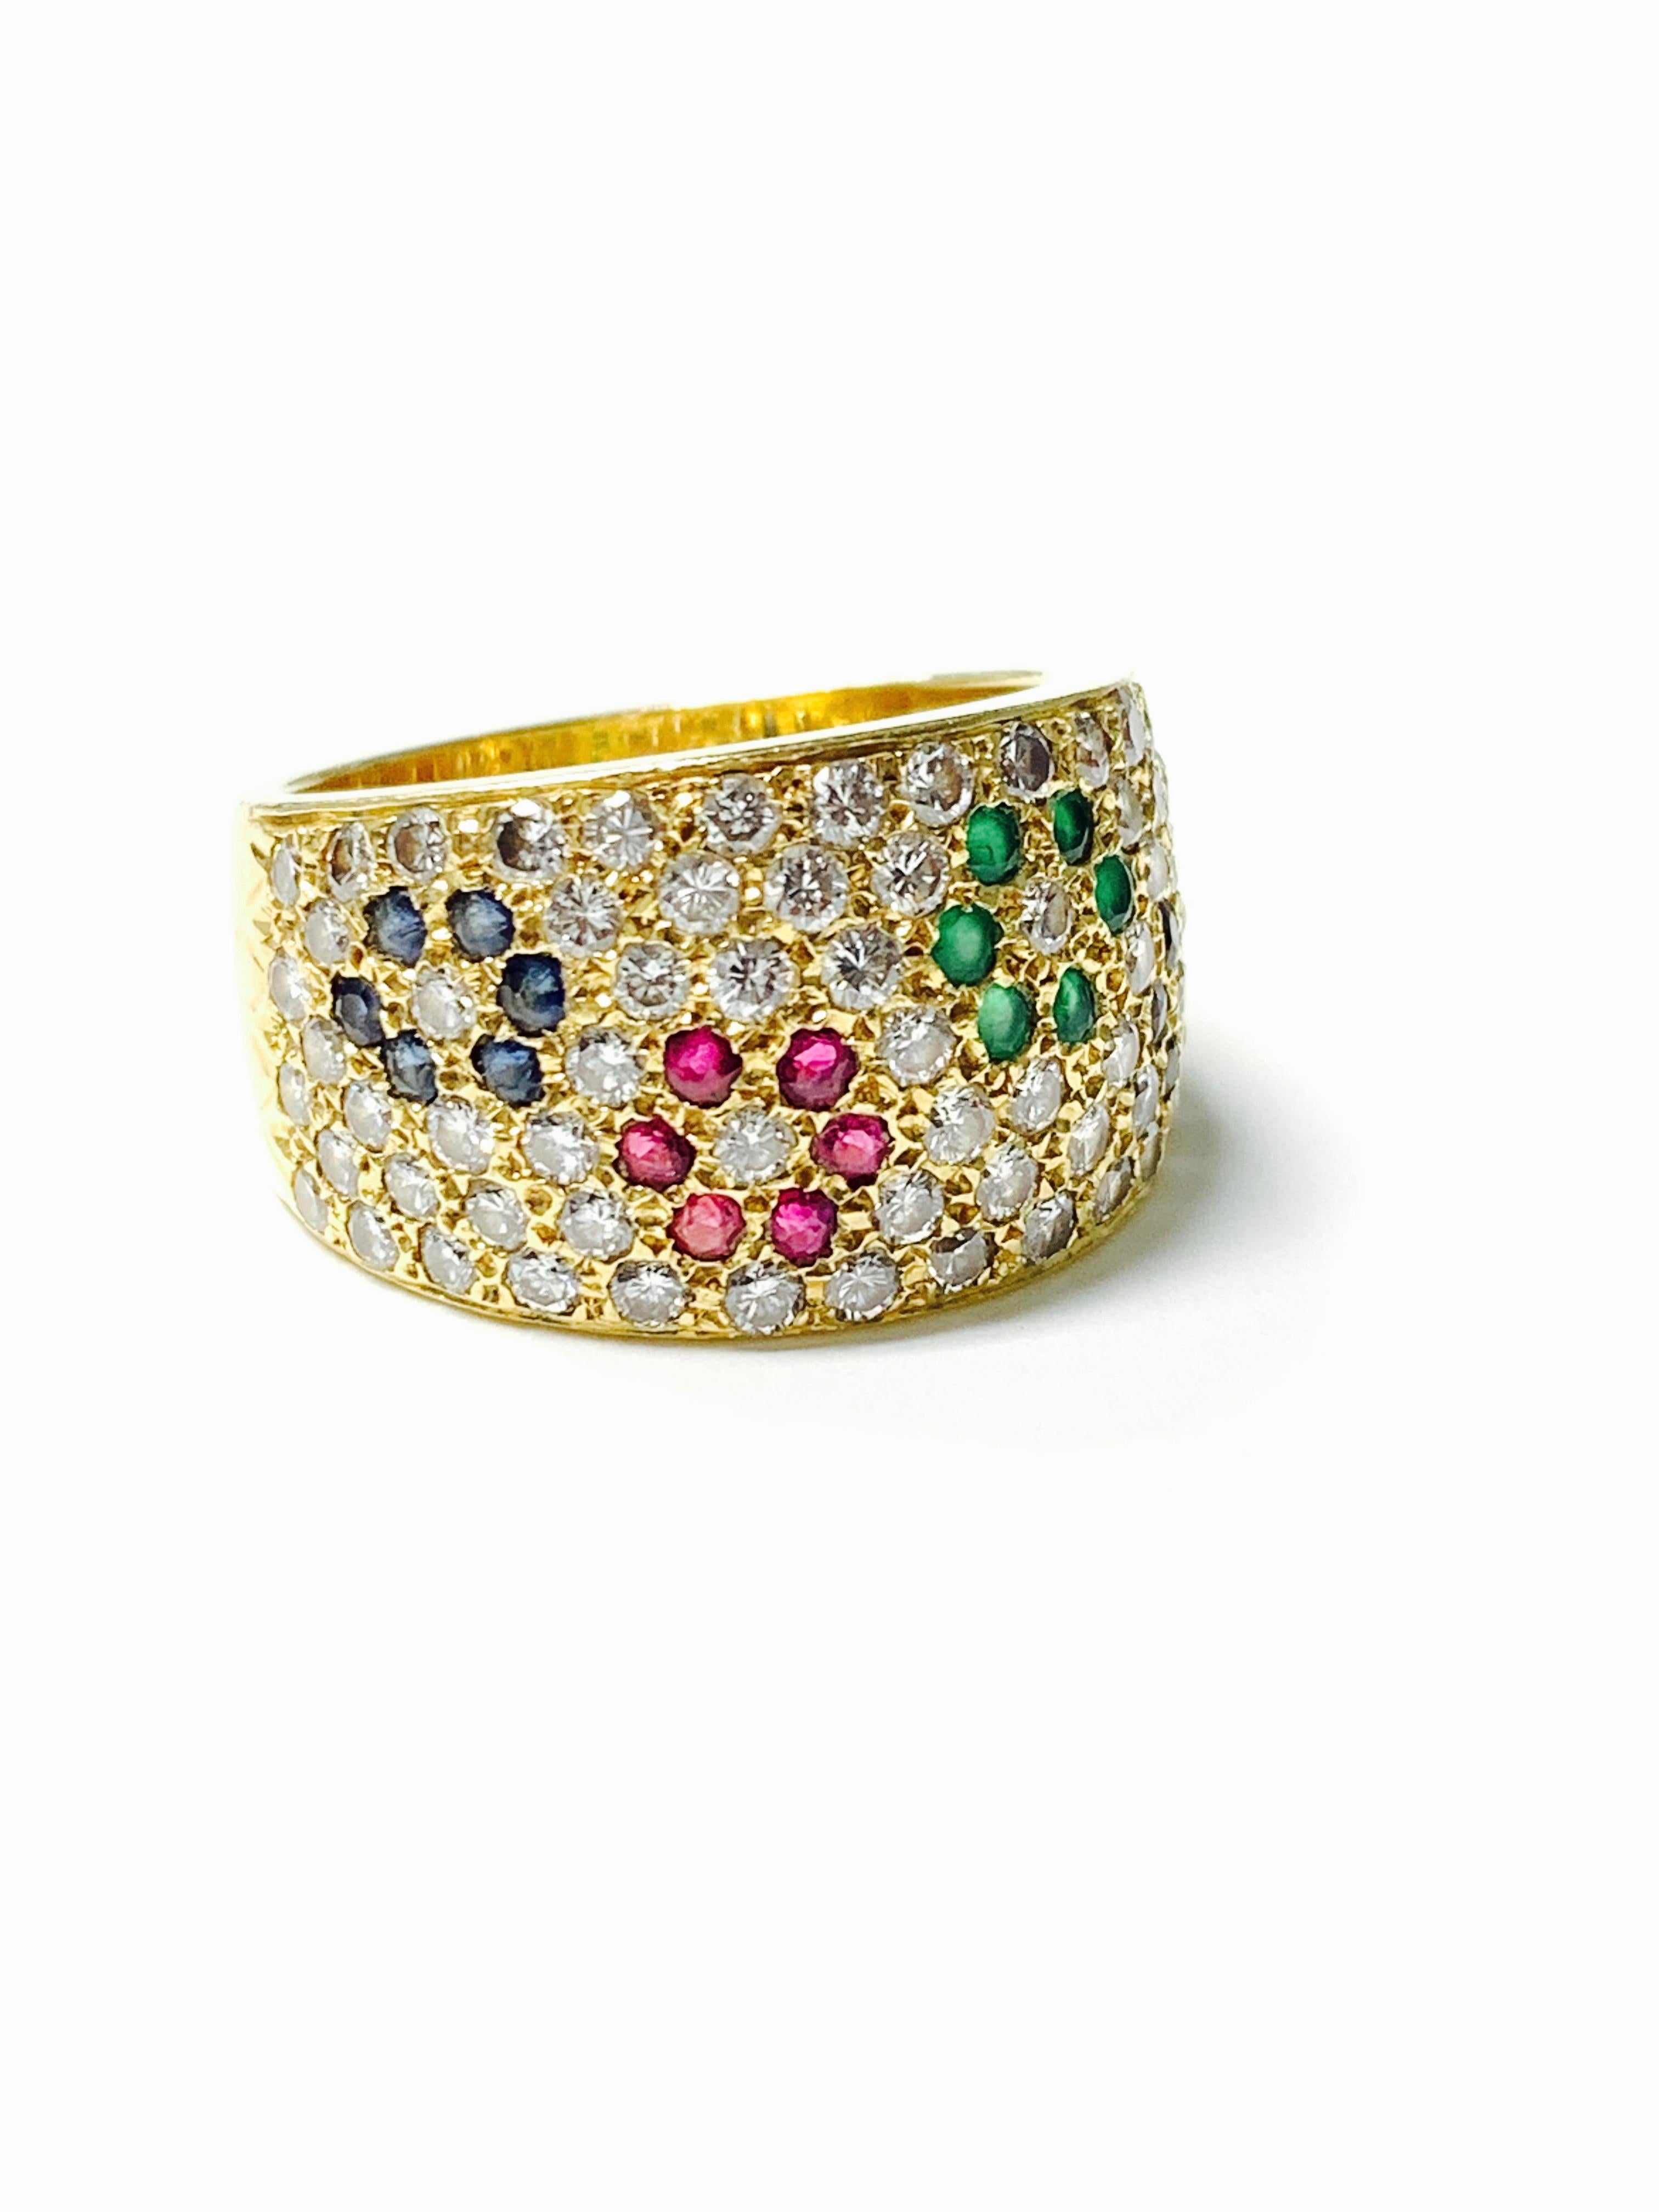 Round Cut Diamond, Ruby, Emerald and Blue Sapphire Ring in 18 K Gold